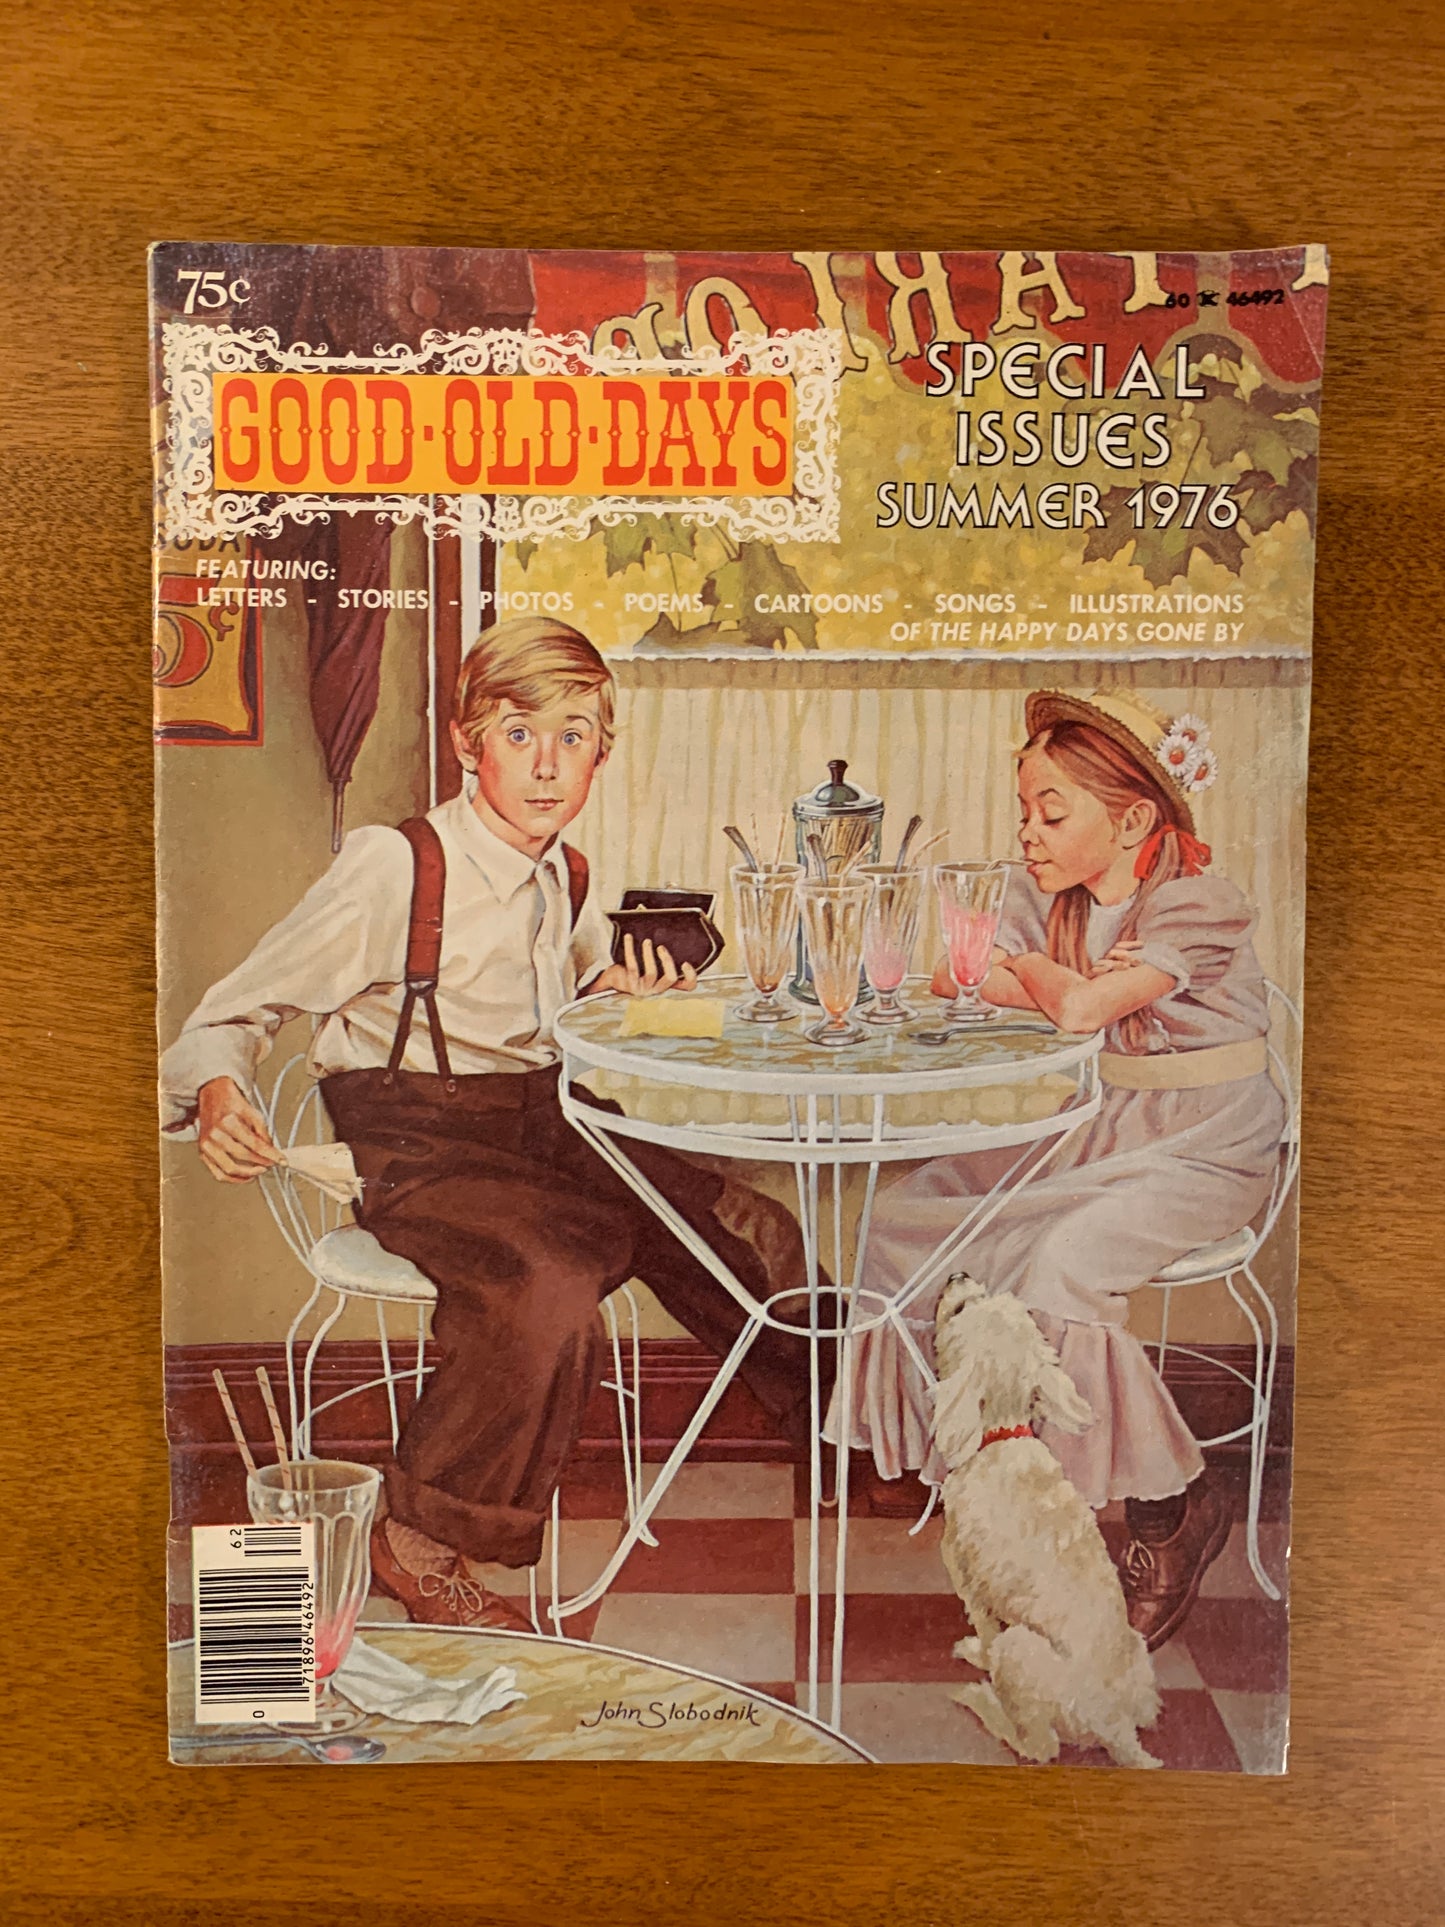 Good Old Days Magazine Special Issues Summer 1976, Fort Smith, Billy Bunk, Ads